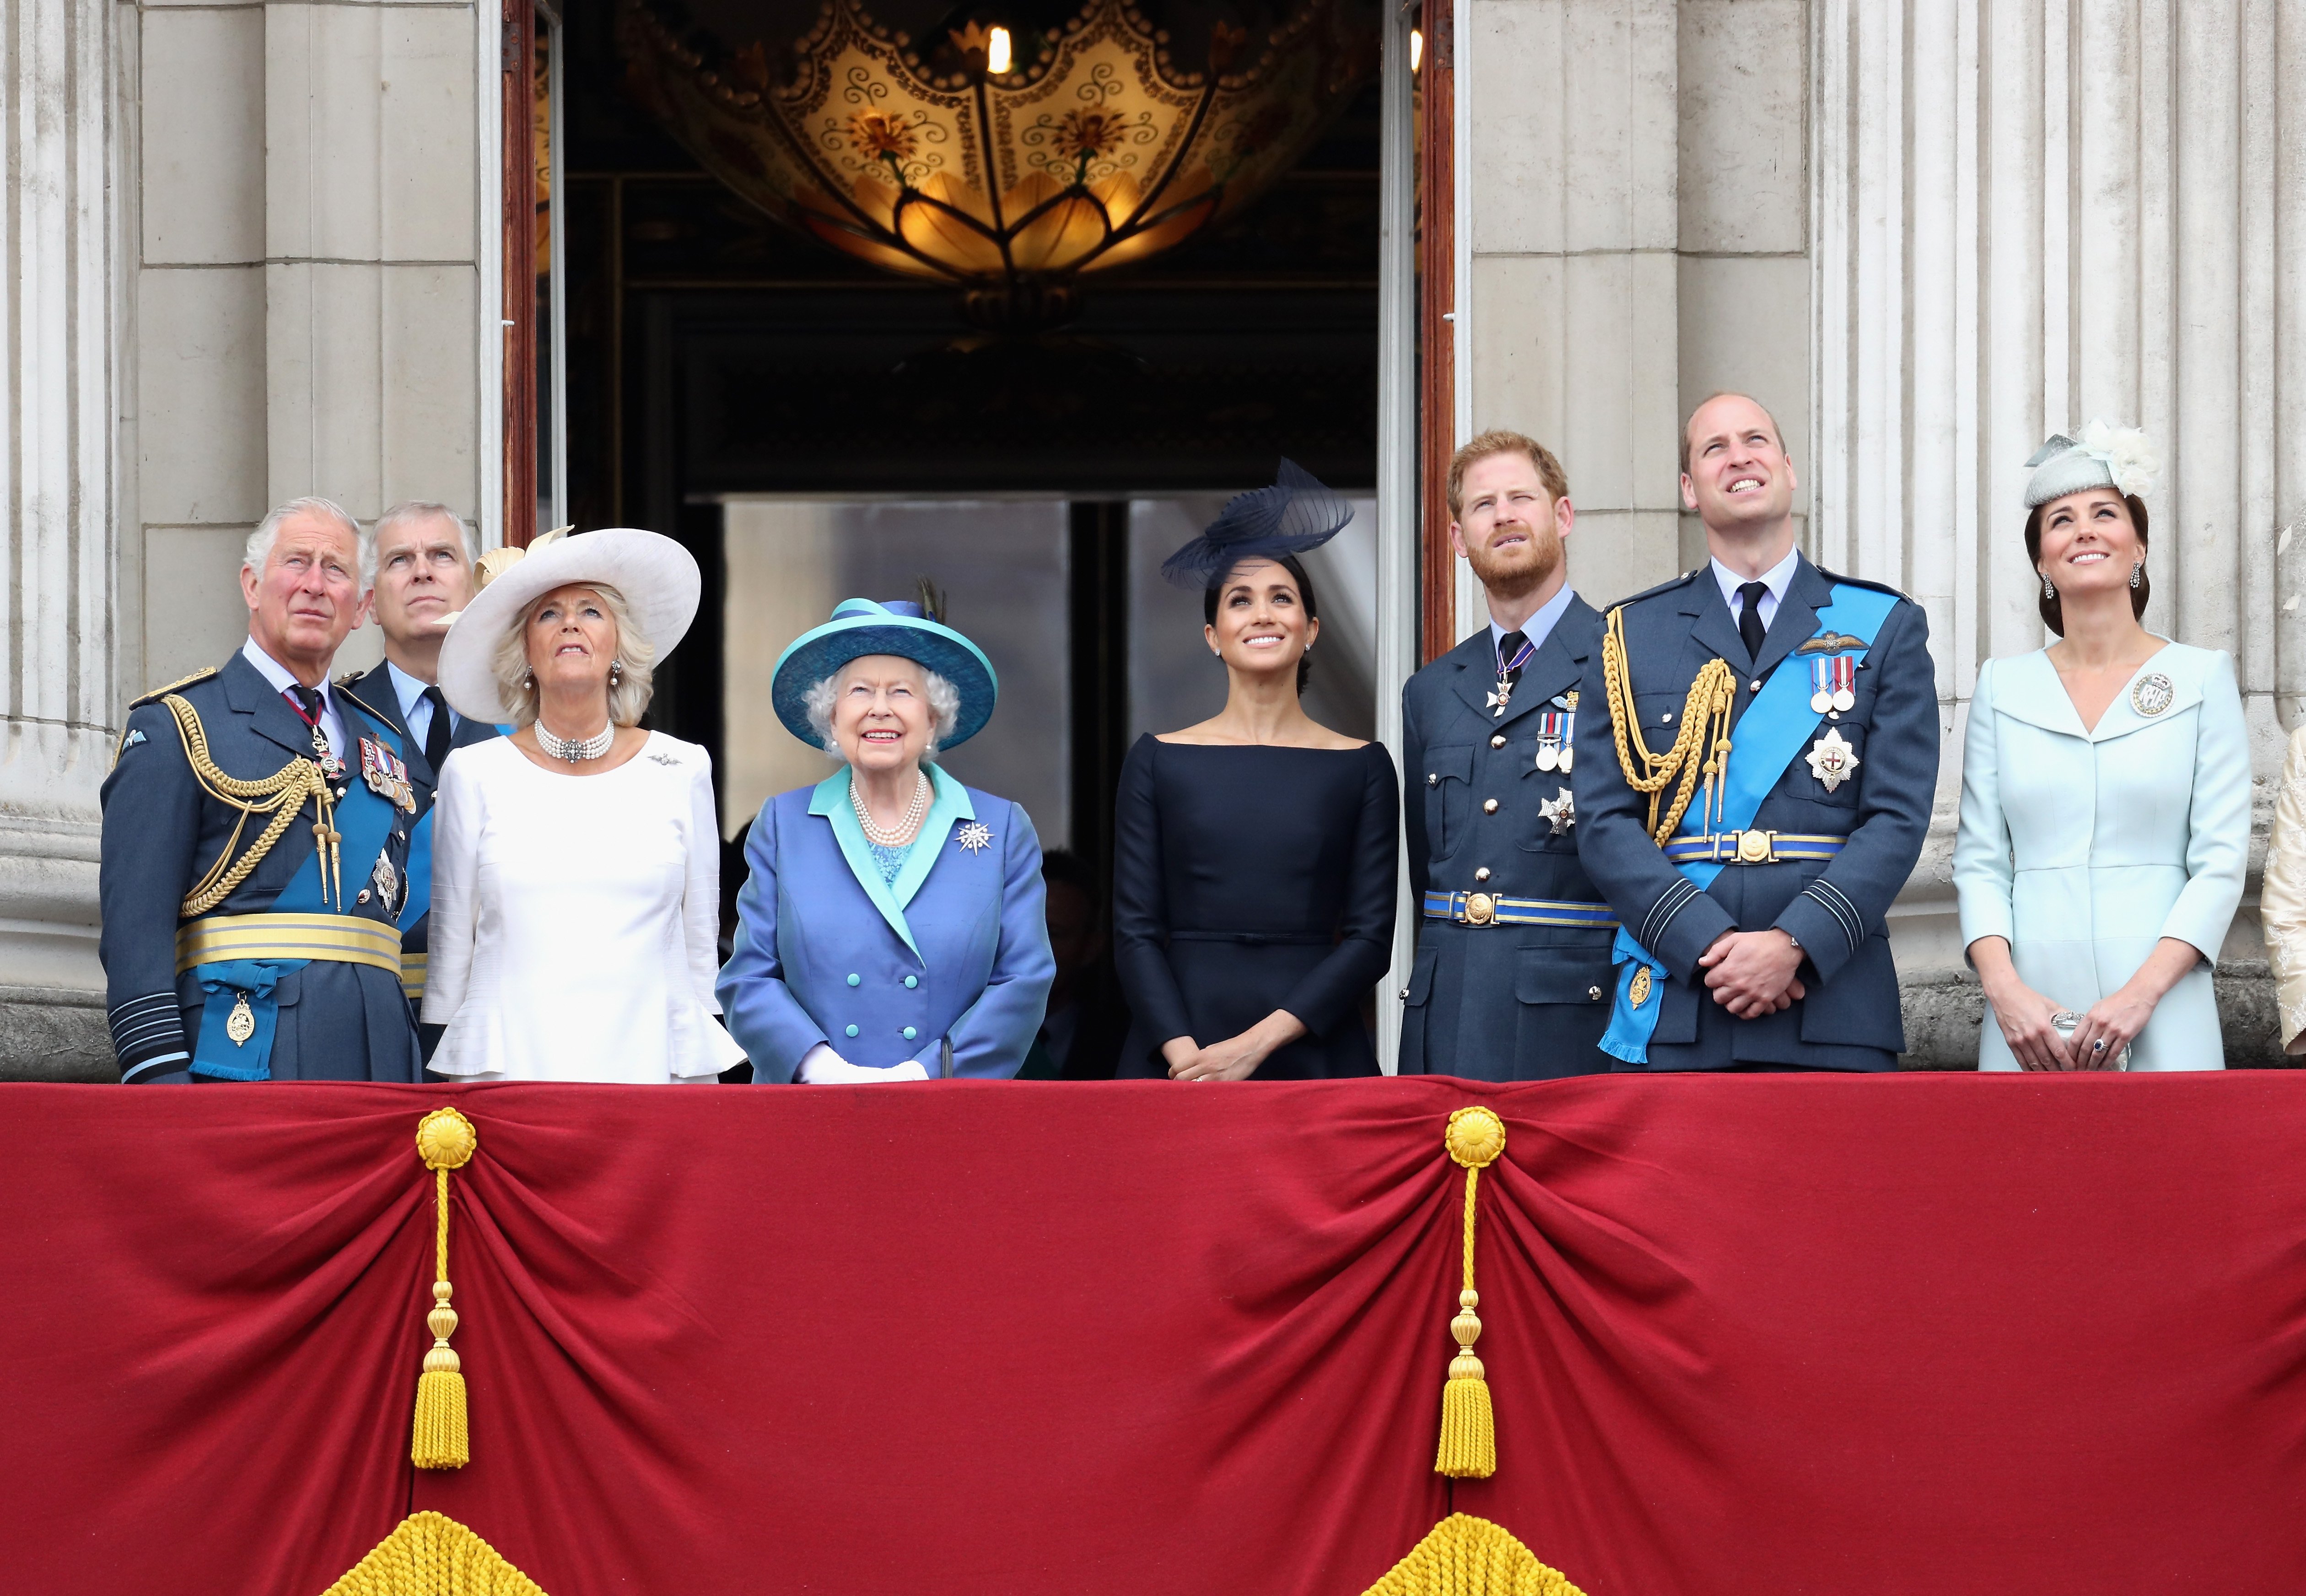 Prince Charles, Prince of Wales, Prince Andrew, Duke of York, Camilla, Duchess of Cornwall, Queen Elizabeth II, Meghan, Duchess of Sussex, Prince Harry, Duke of Sussex, Prince William, Duke of Cambridge and Catherine, Duchess of Cambridge watch the RAF flypast on the balcony of Buckingham Palace